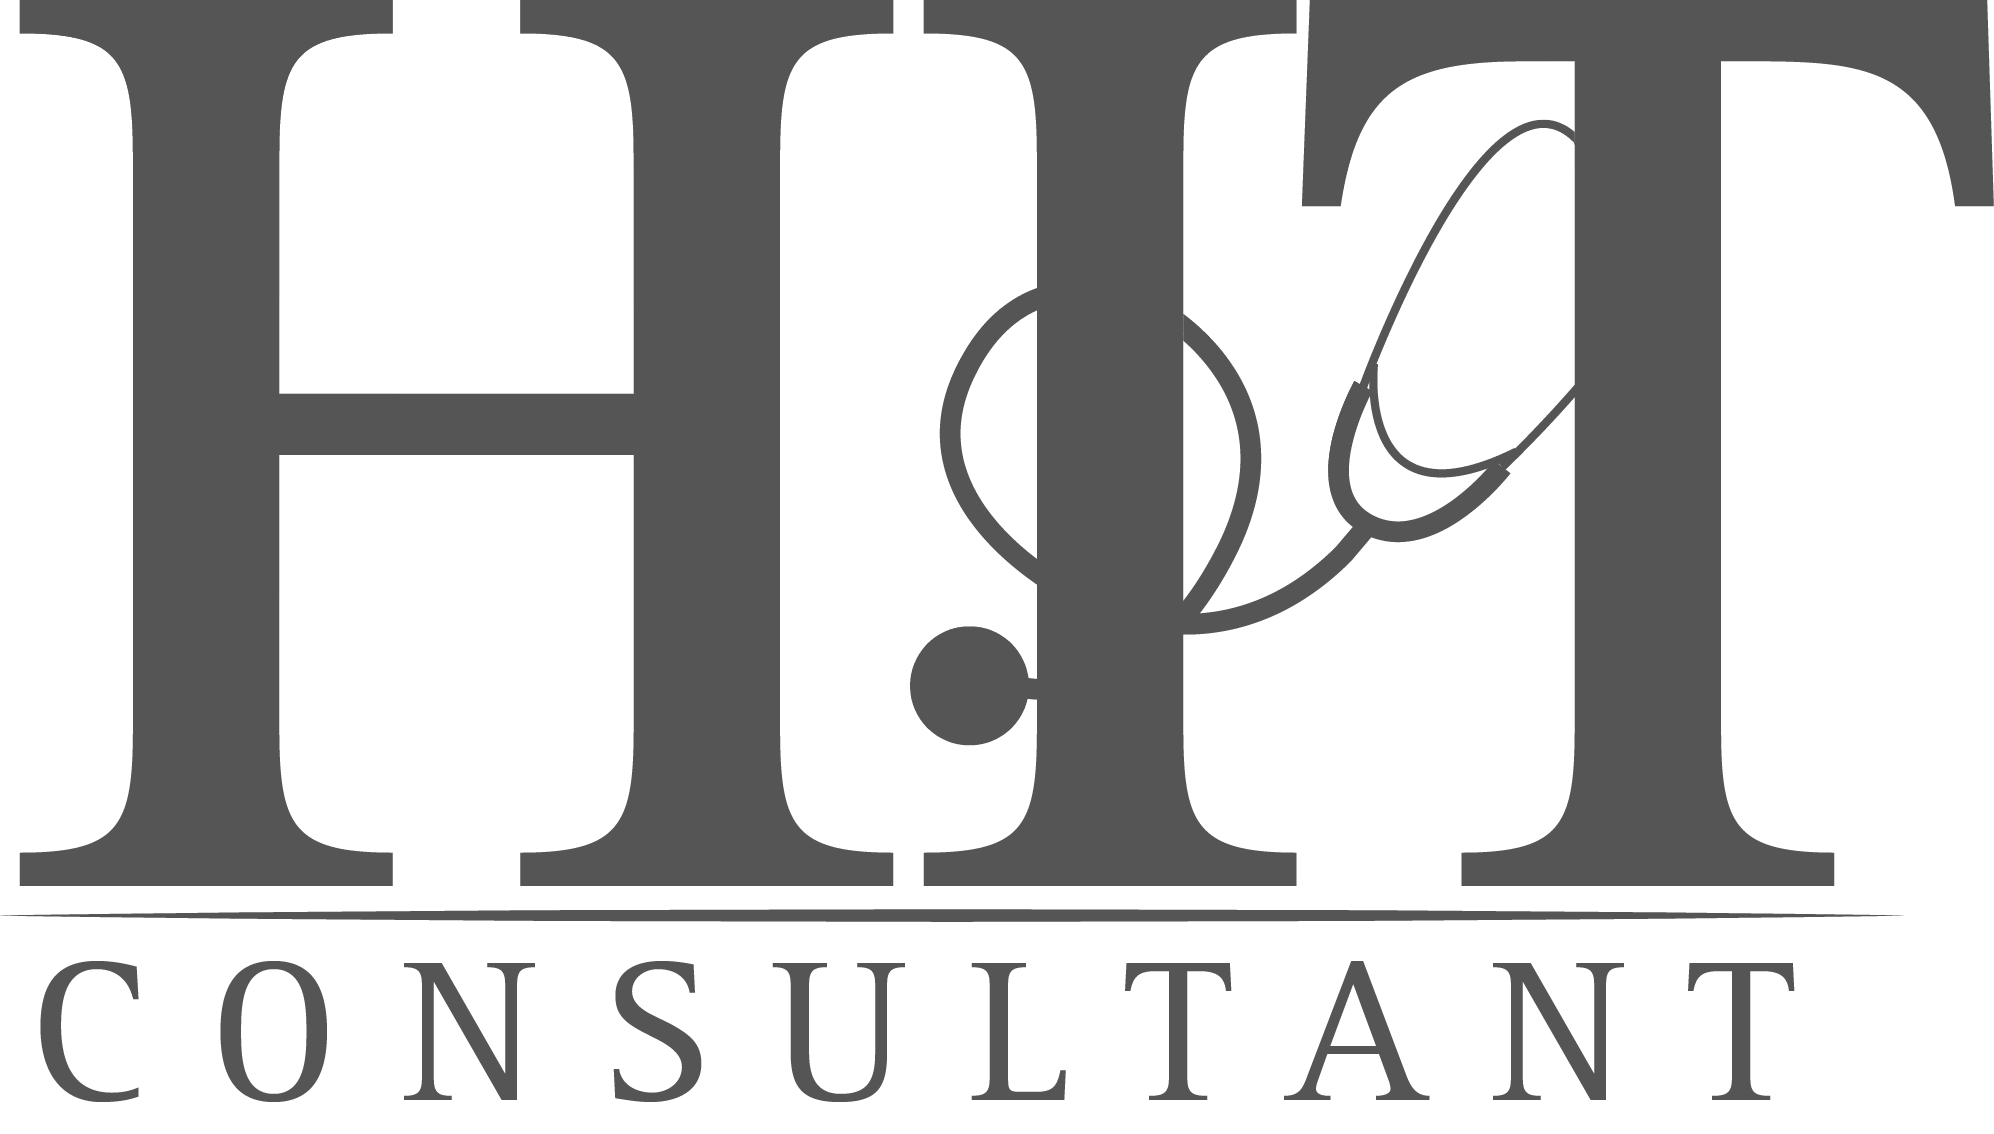 HIT Consultant logo in black and white